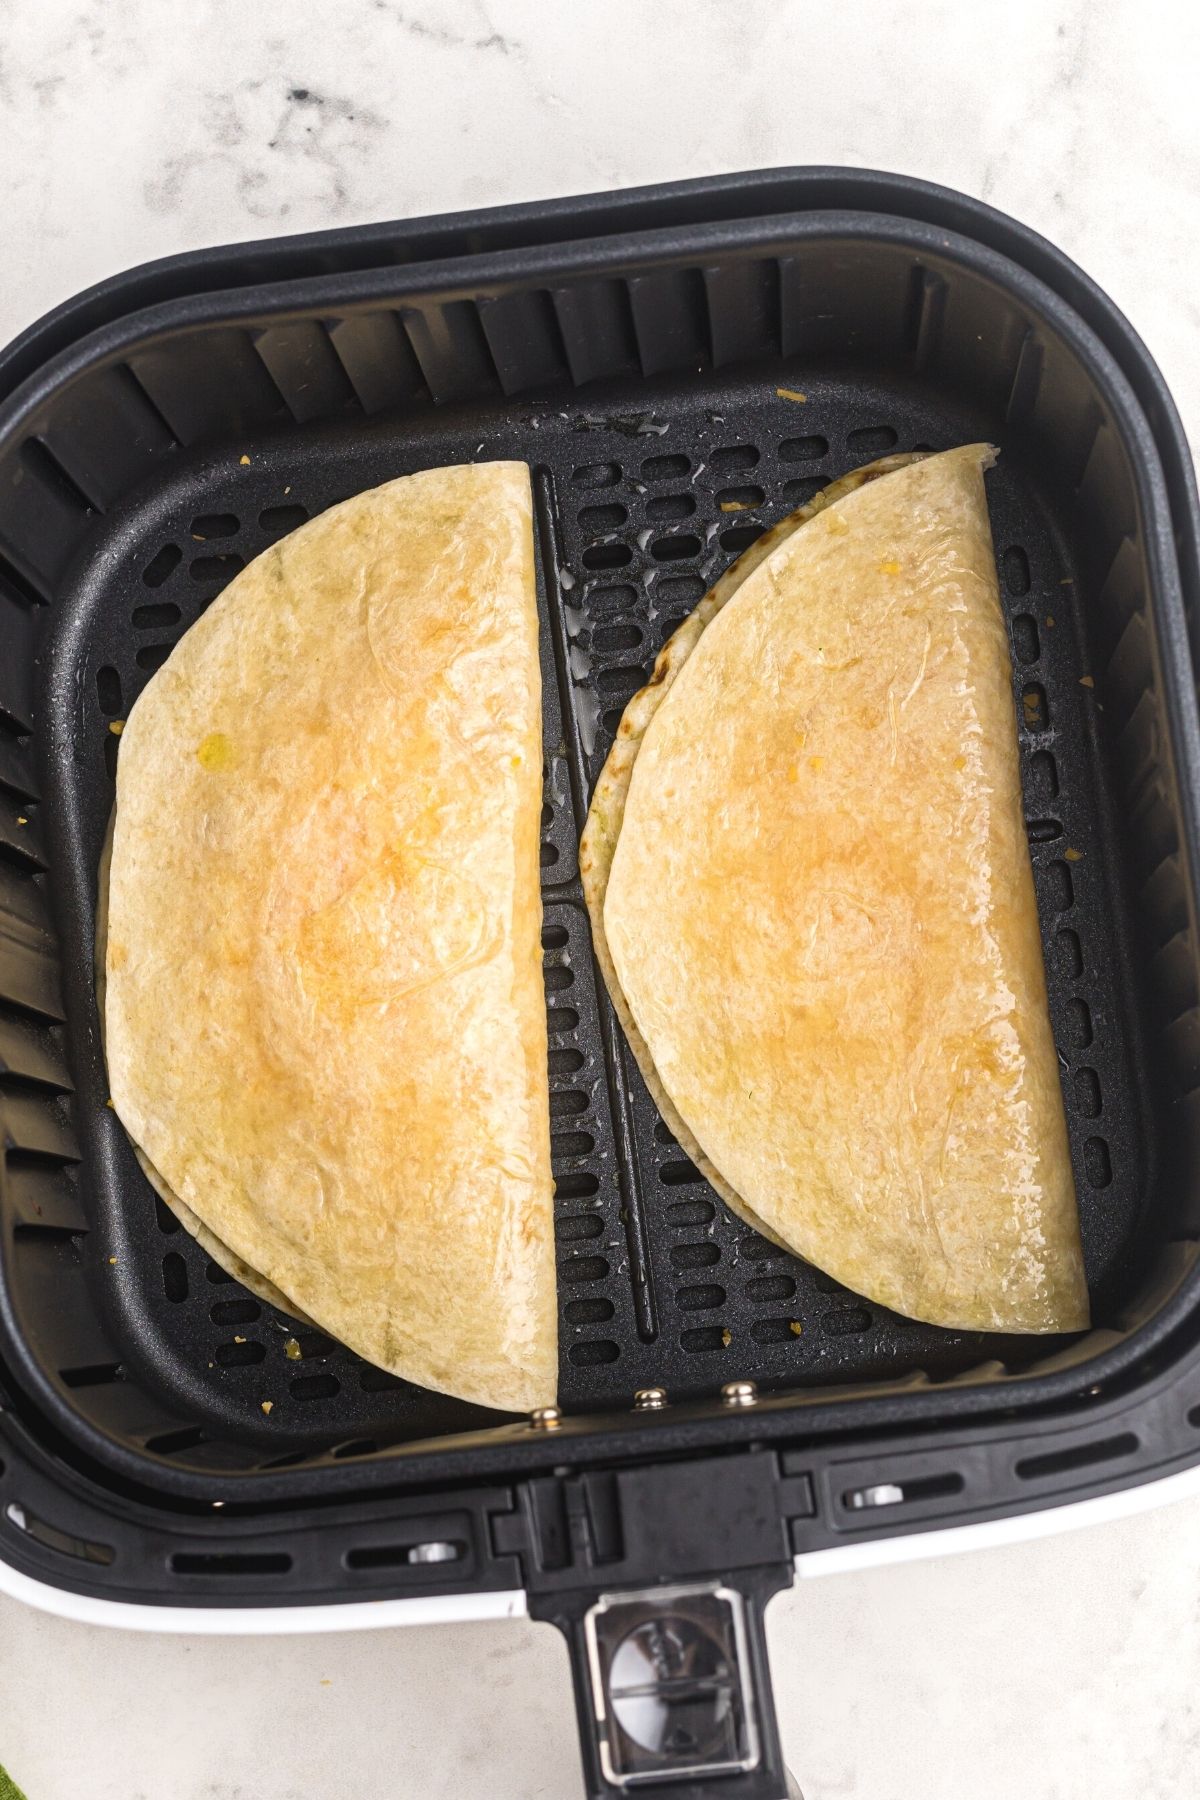 Uncooked tortillas filled with cheese in the air fryer basket.